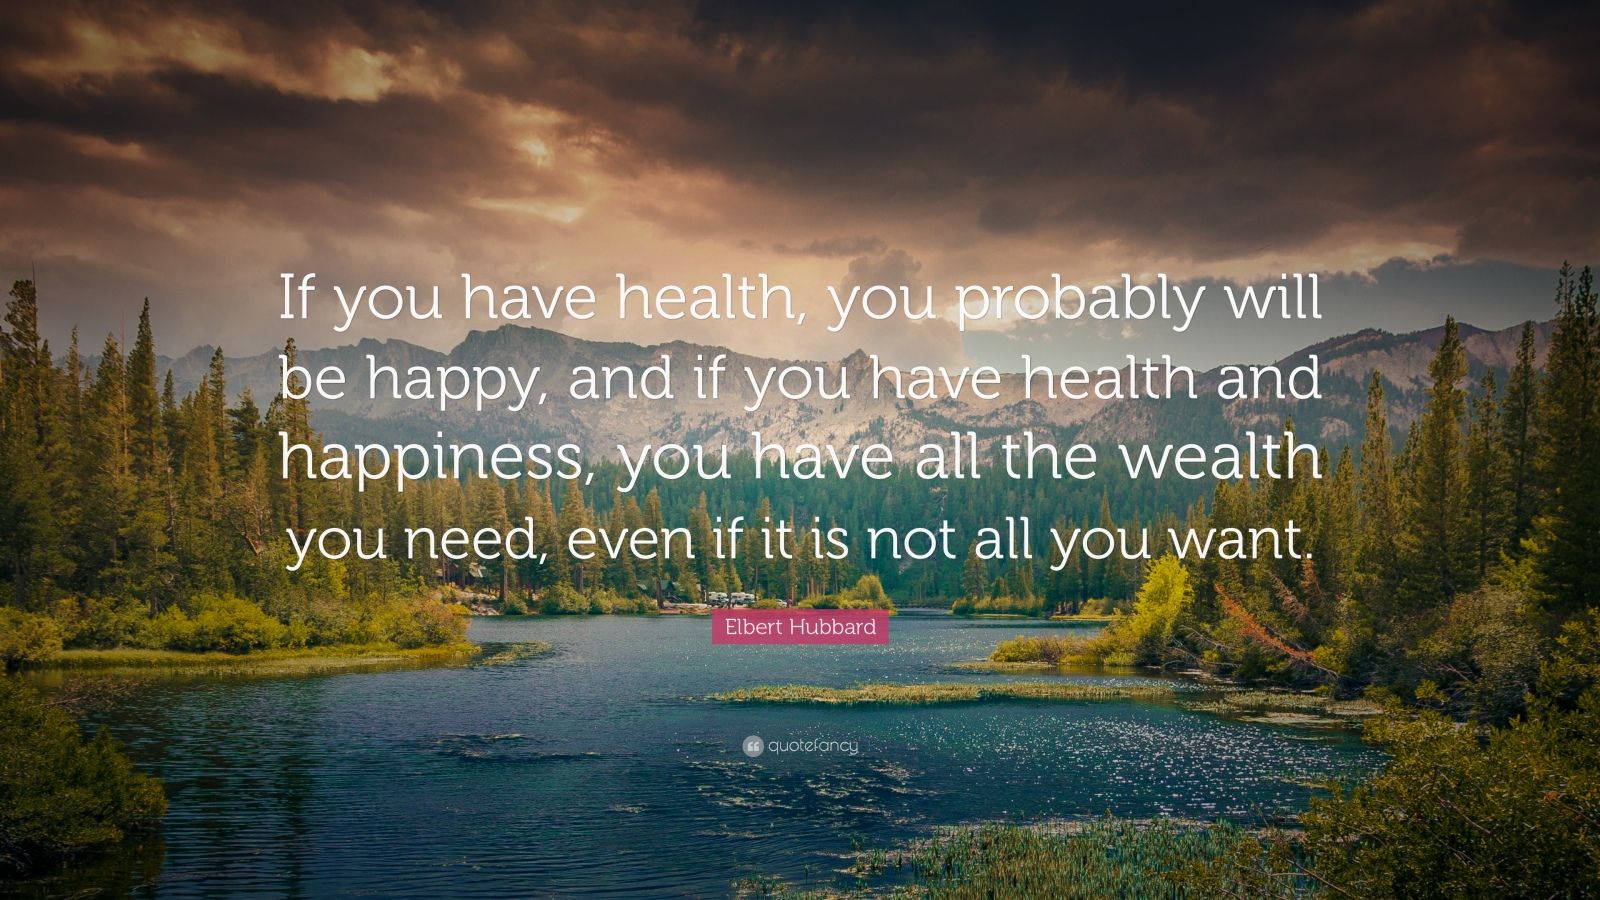 49351 Elbert Hubbard Quote If You Have Health You Probably Will Be Happy 